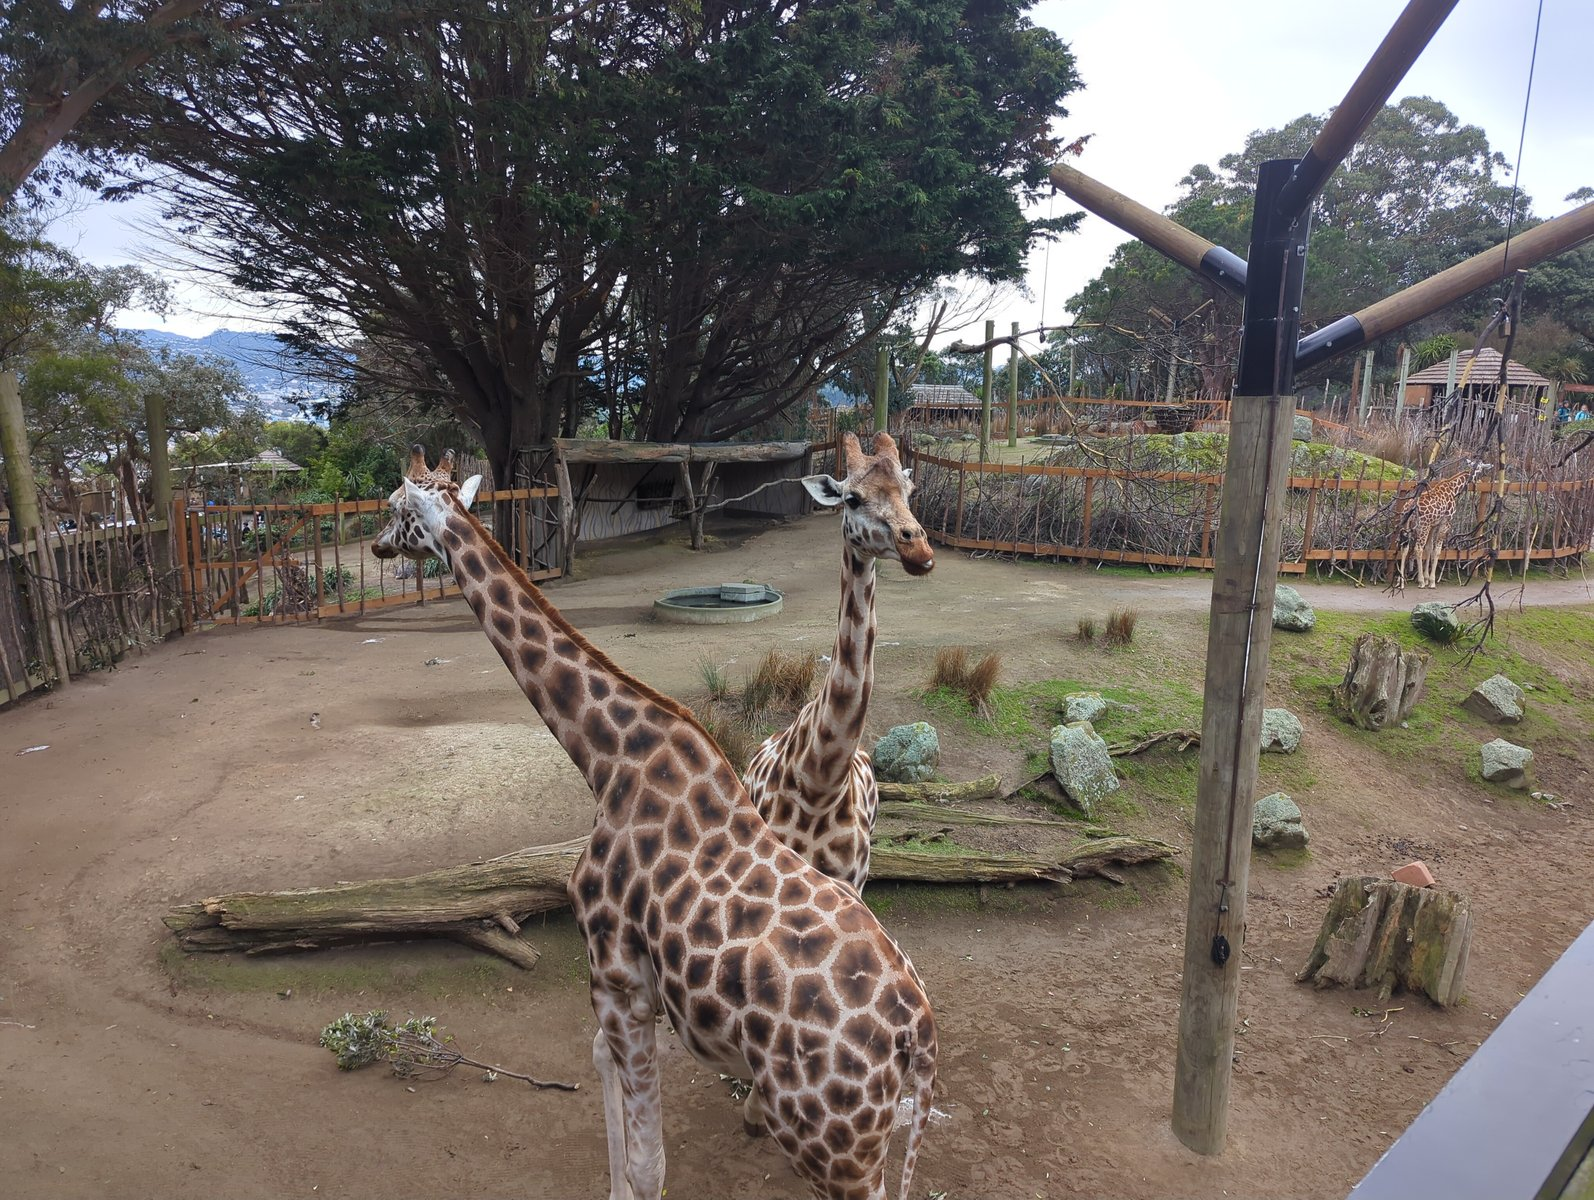 photo of two giraffes at zoo, facing opposite directions with their necks together making a V shape